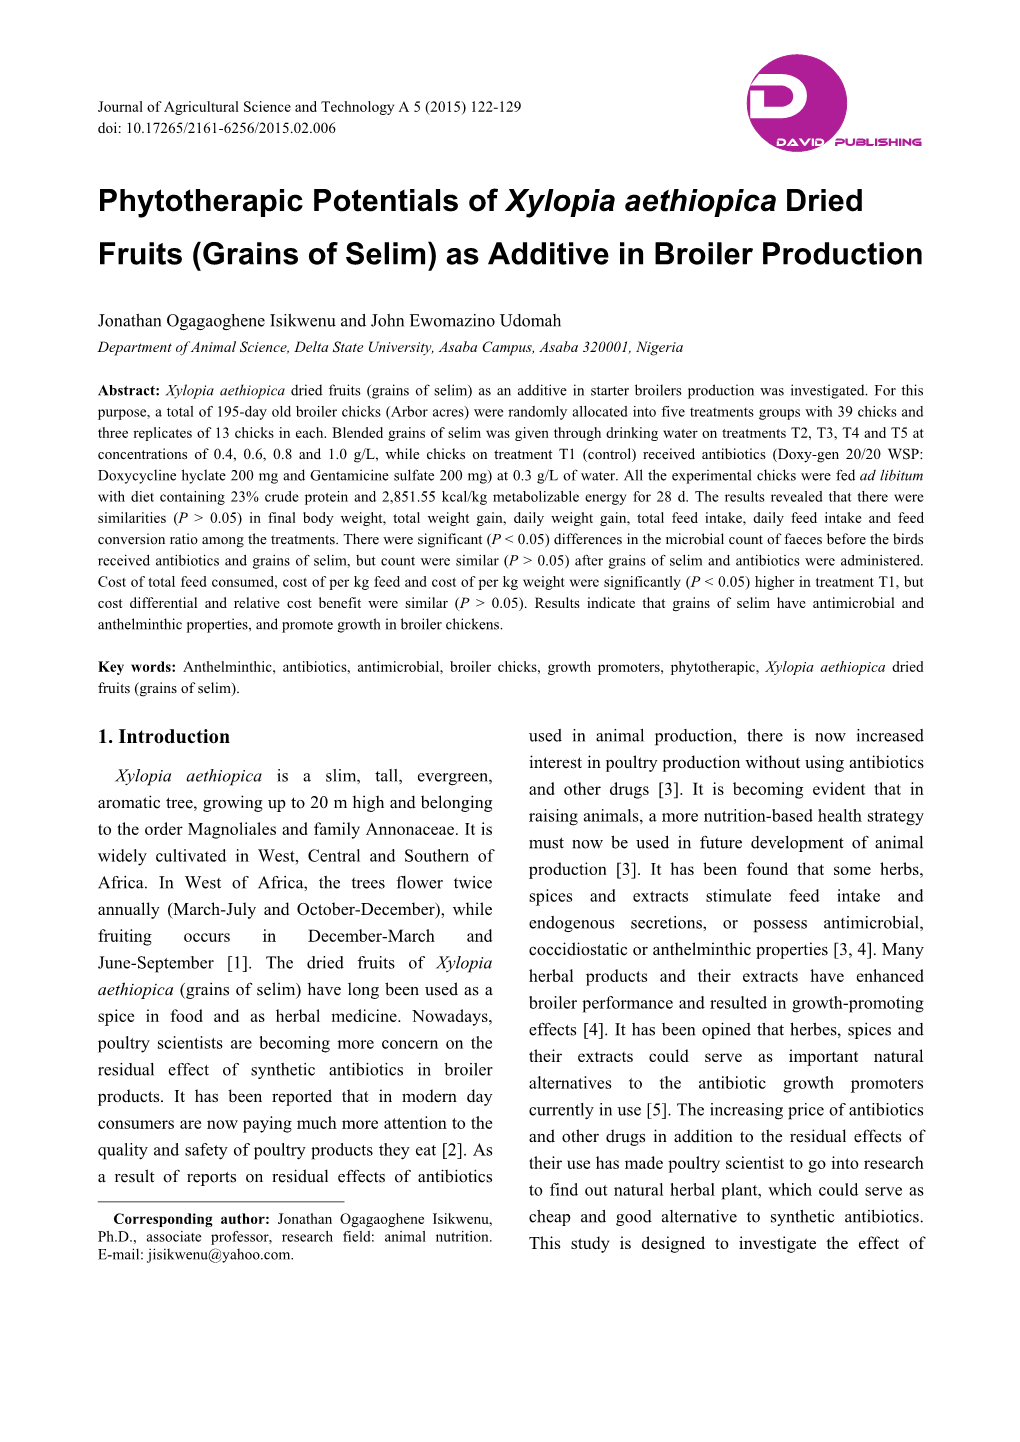 Phytotherapic Potentials of Xylopia Aethiopica Dried Fruits (Grains of Selim) As Additive in Broiler Production